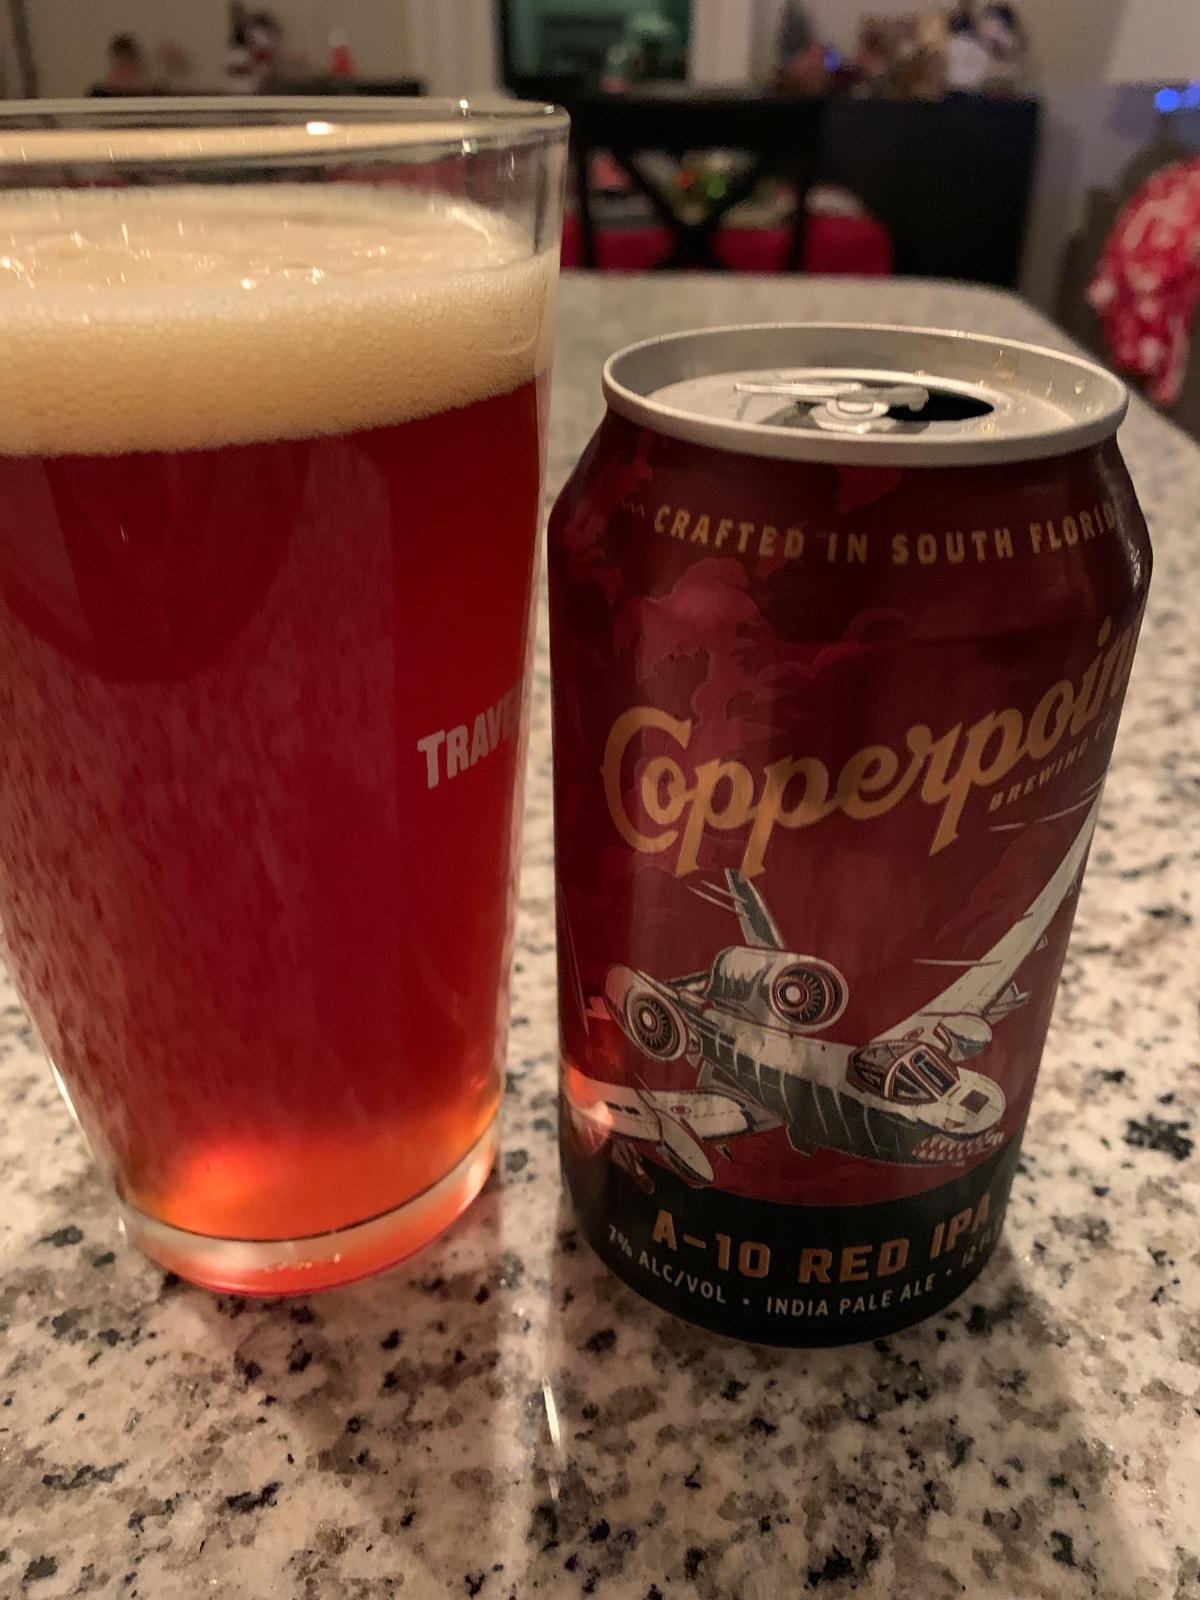 A-10 Red IPA